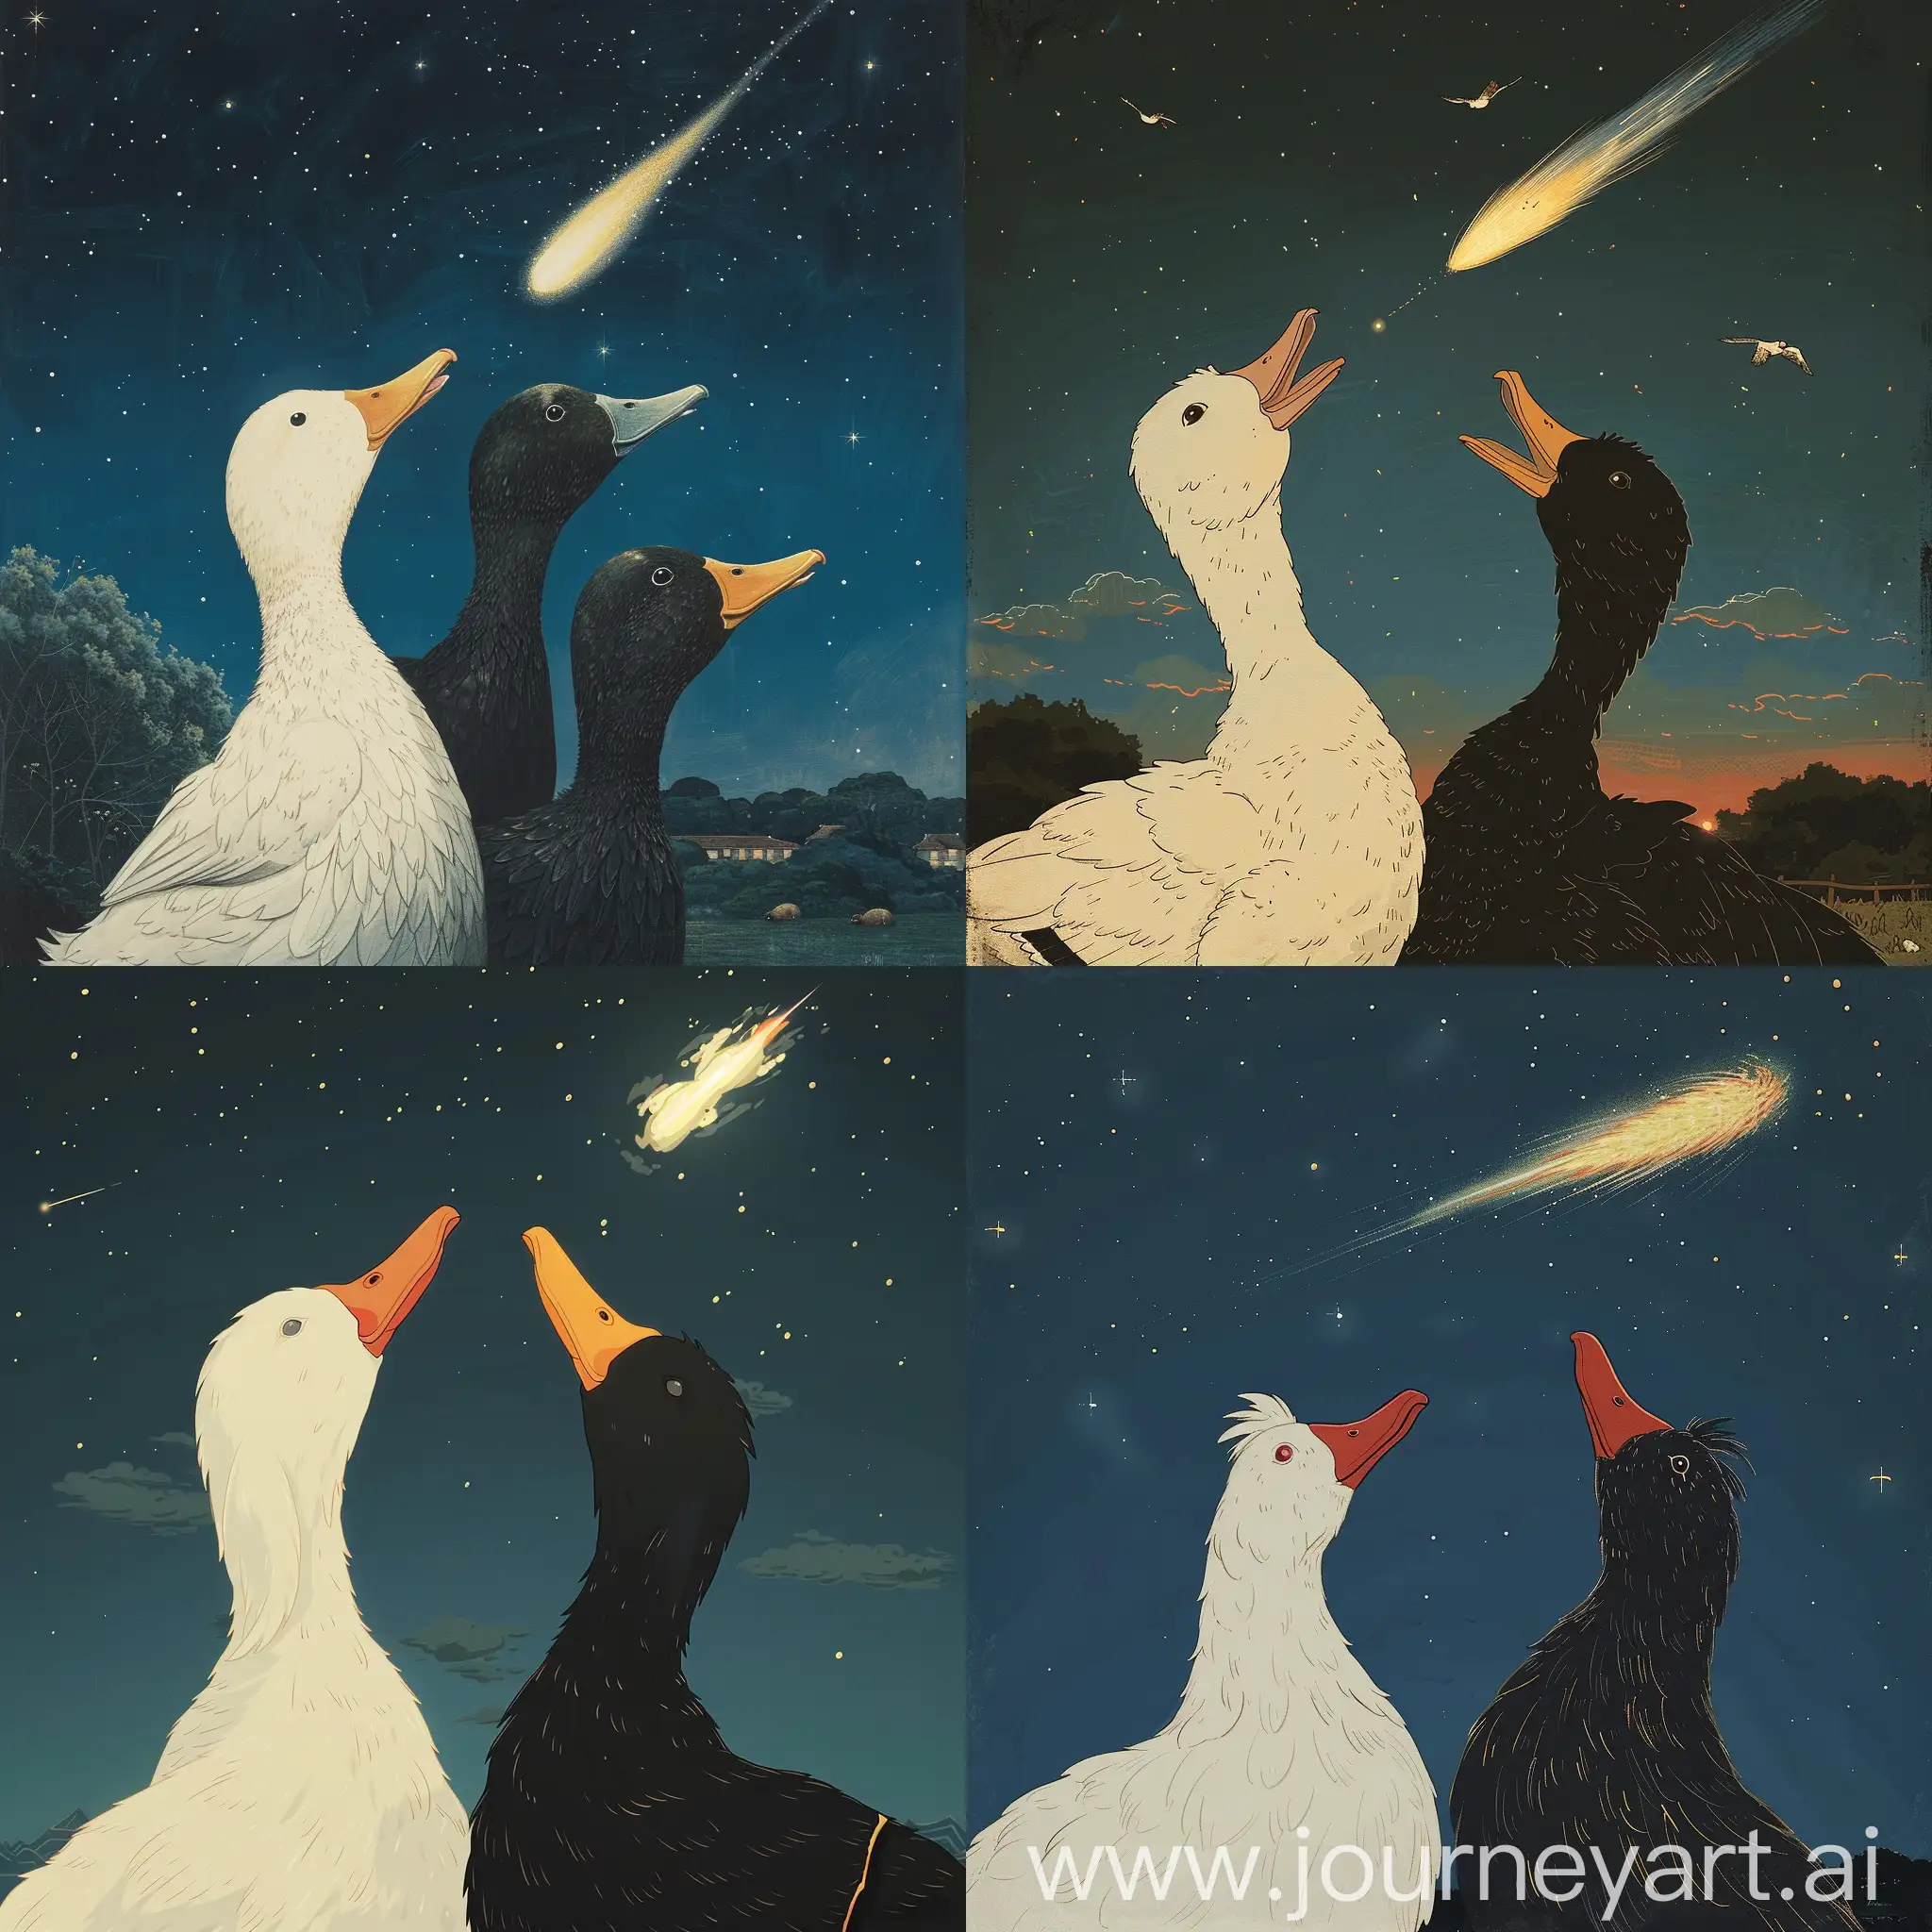 Black-and-White-Ducks-Gazing-at-Meteor-in-Nocturnal-Setting